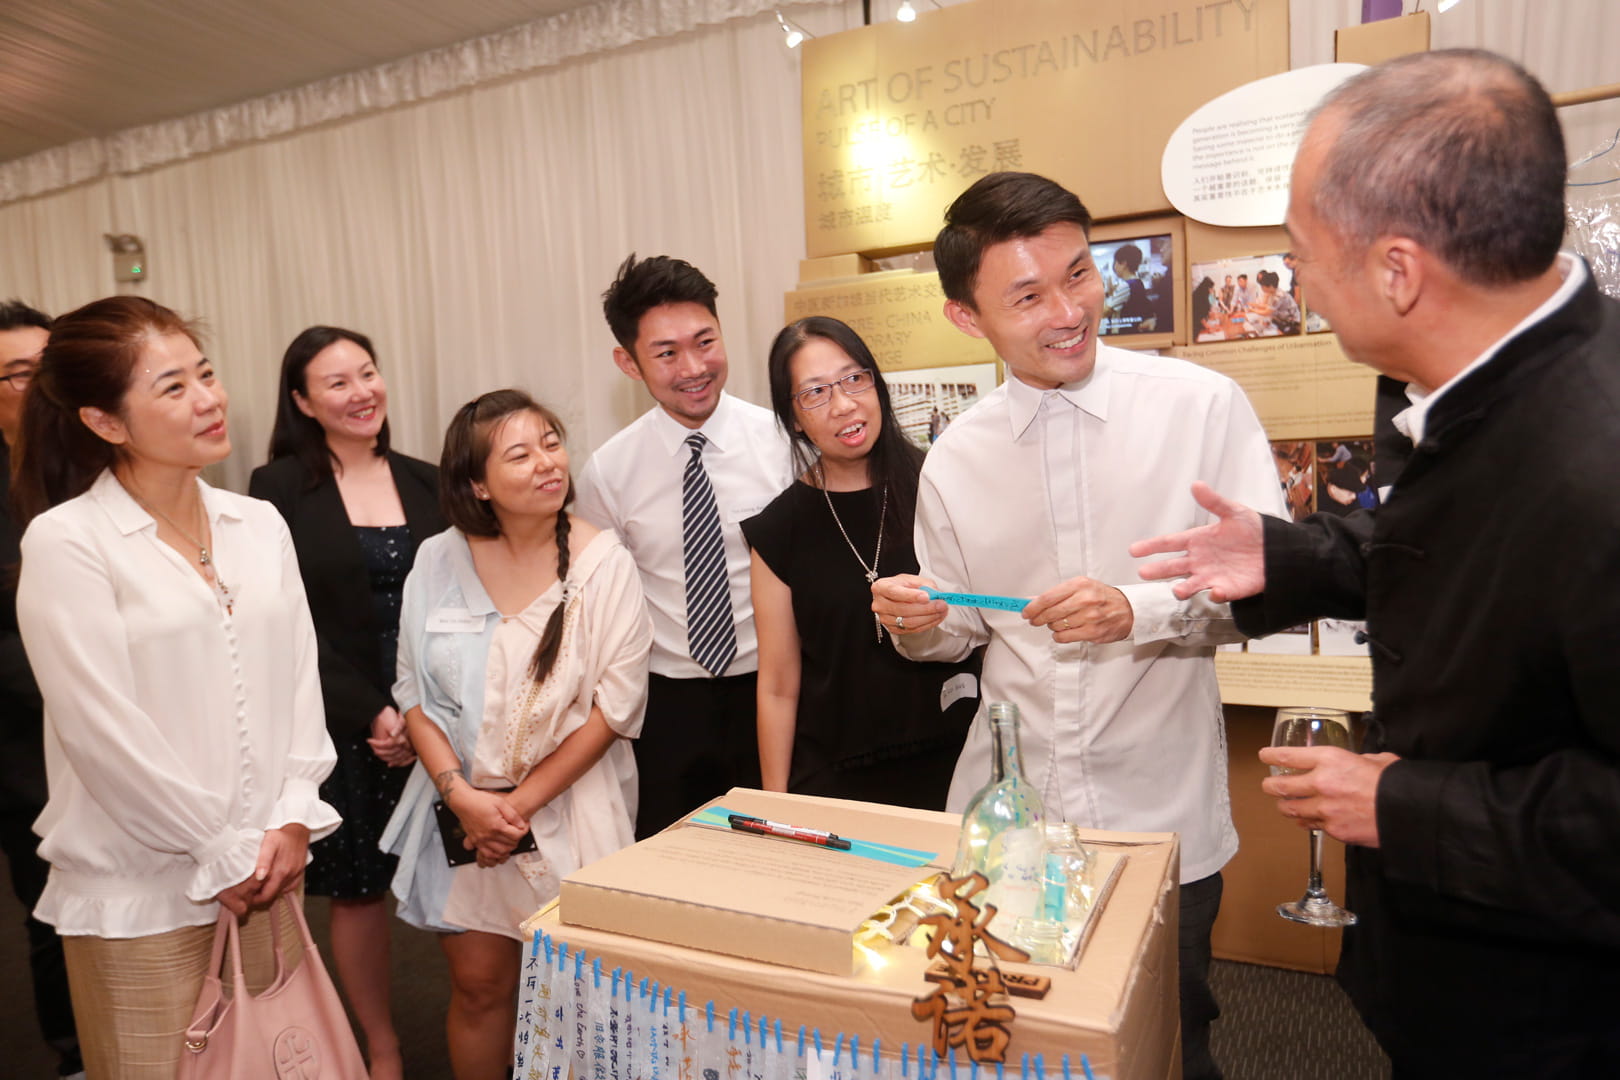 The Singapore International Foundation’s cultural ambassador Mr Sun Yu-li (extreme right) introducing the Art of Sustainability exhibit to guest-of-honour Parliamentary Secretary Mr Baey Yam Keng (second from right) at ShiOK! Nite